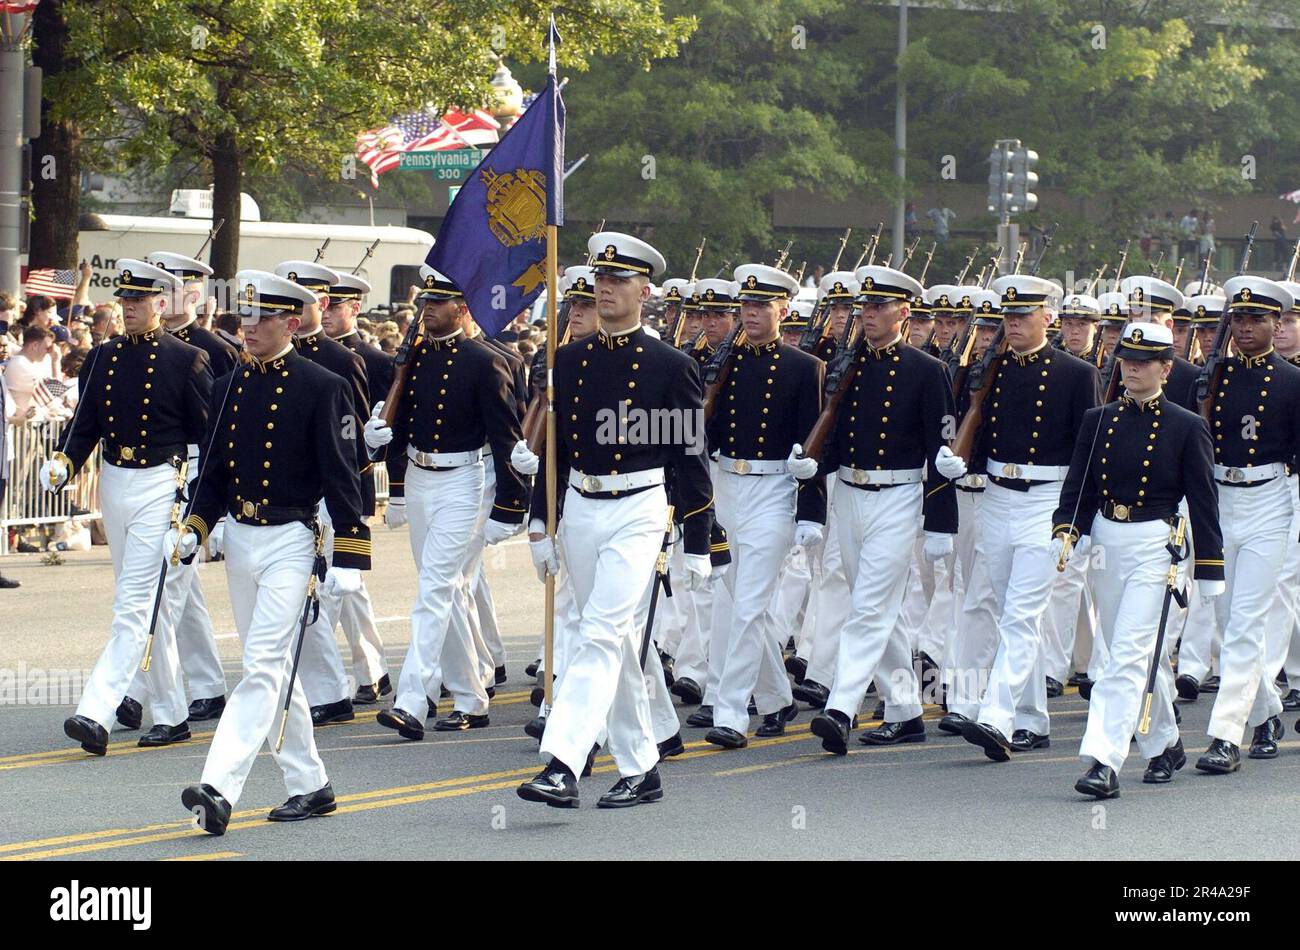 US Navy U.S. Navy Midshipmen from the U.S. Naval Academy participate in the precession, carrying the flag-draped casket of former President Ronald Reagan Stock Photo